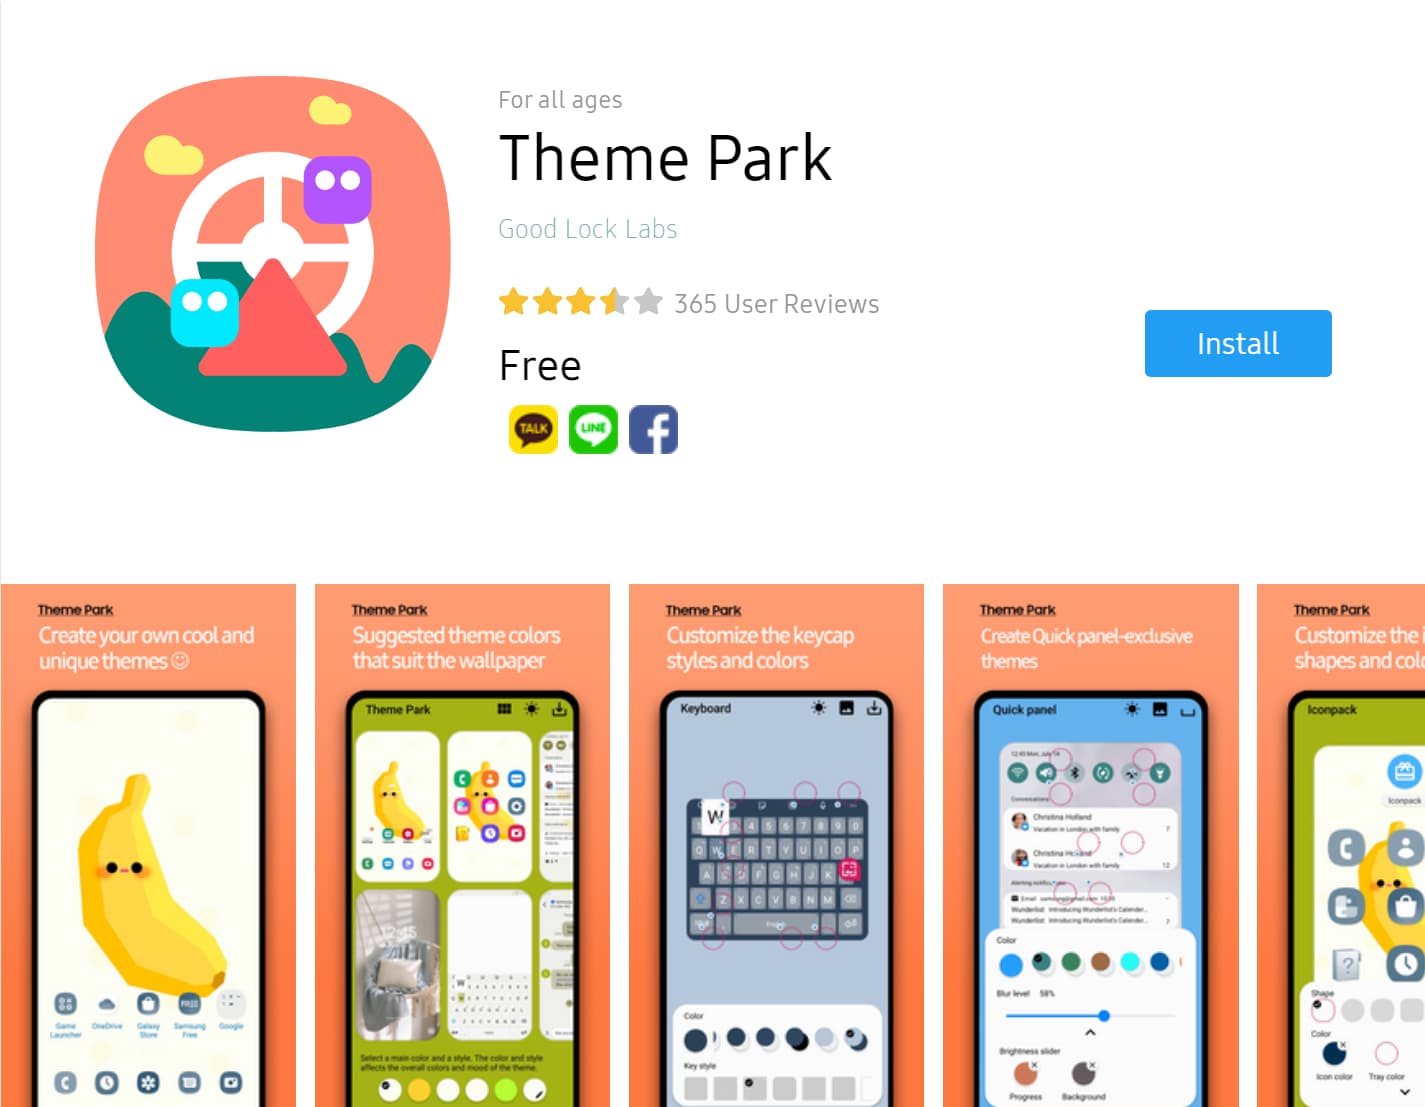 Google Lock Theme Park v1.1 Major Update with Faster Theme Creation [APK Download]